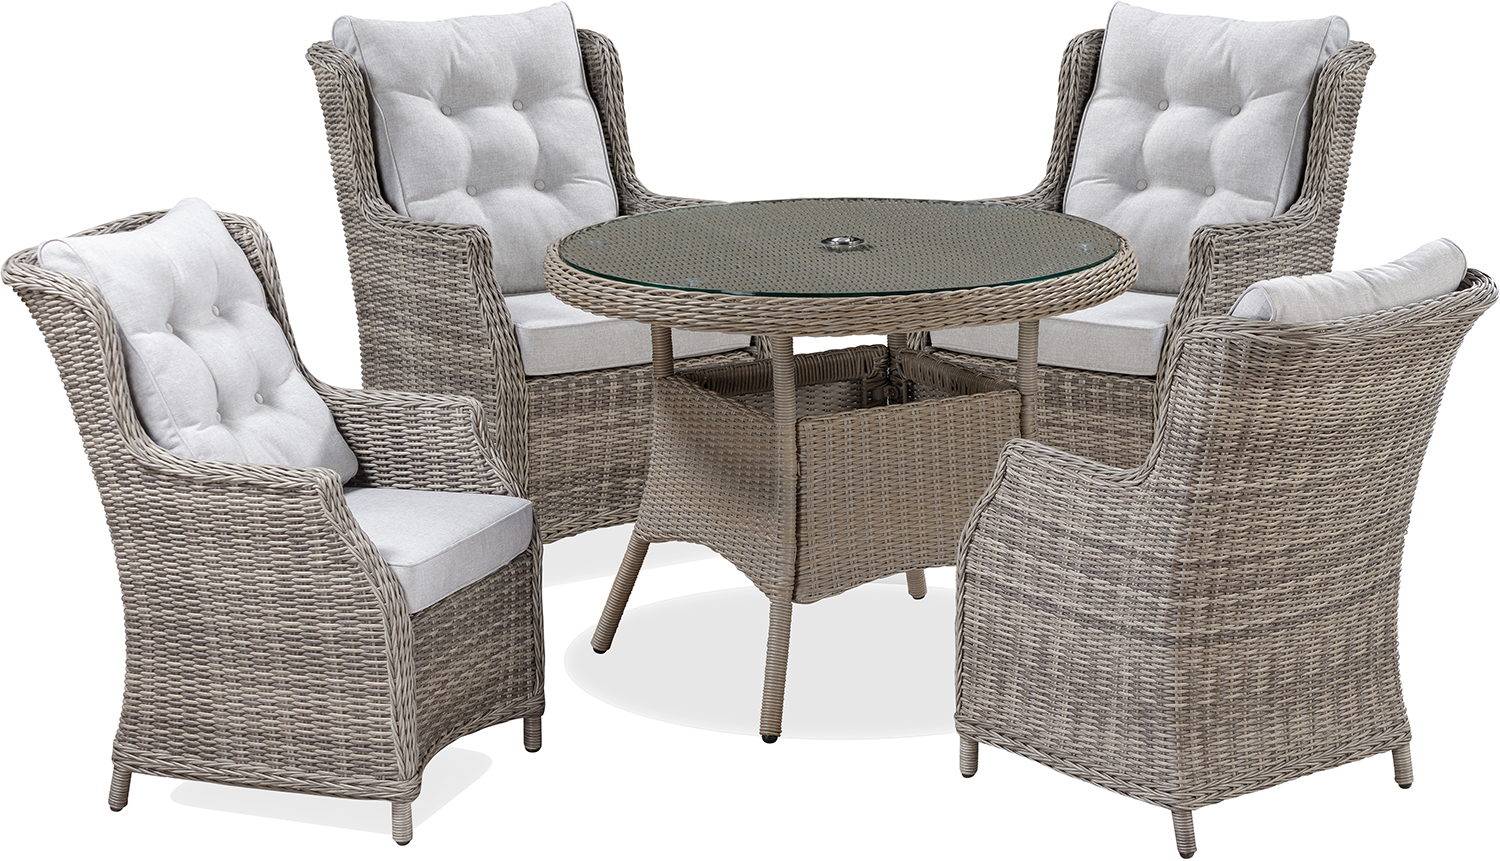 Tom Chambers Capri 4 Seat Dining Set in Pewter | Shackletons